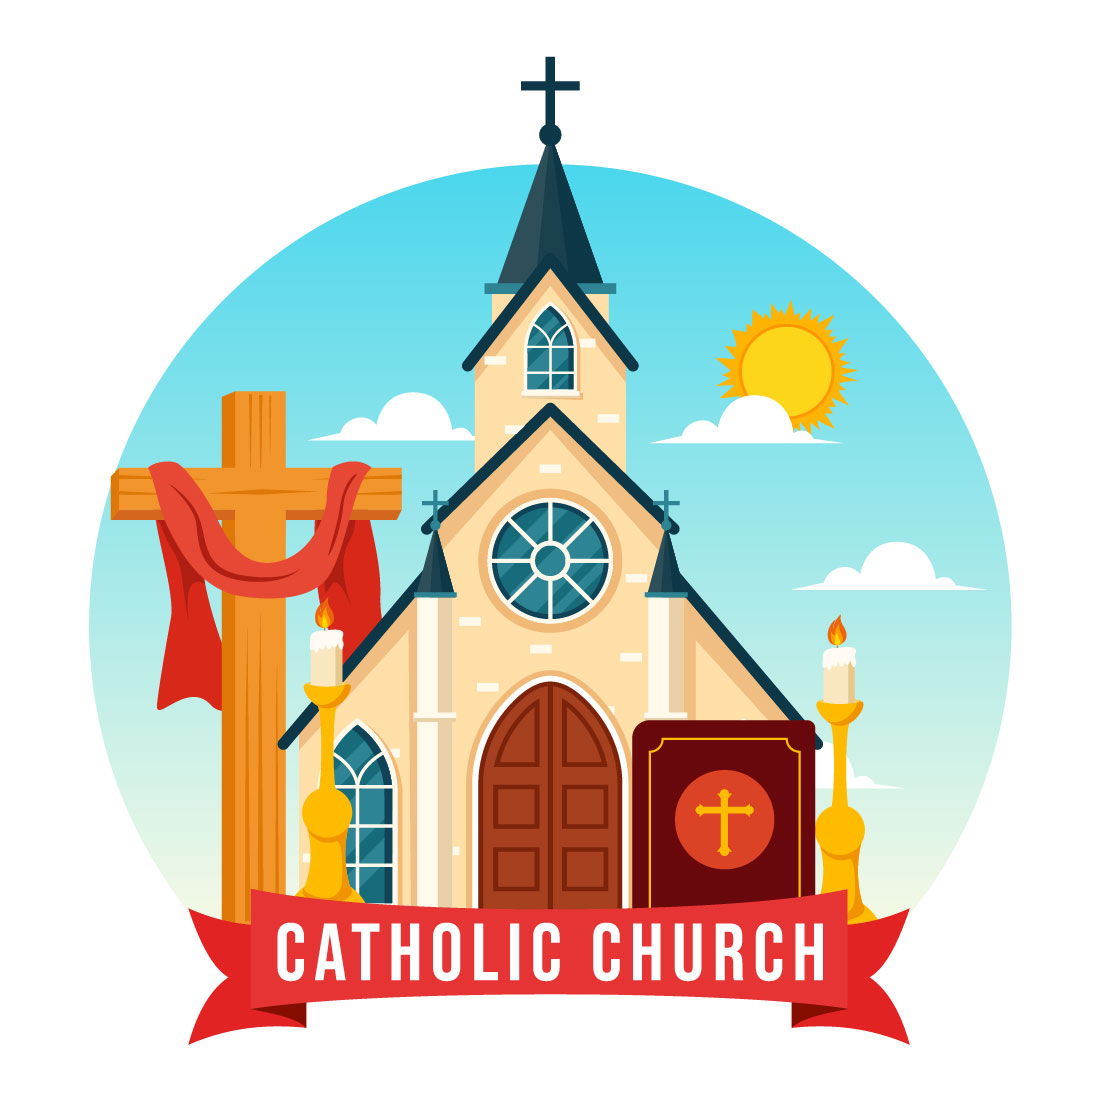 11 Cathedral Catholic Church Illustration preview image.